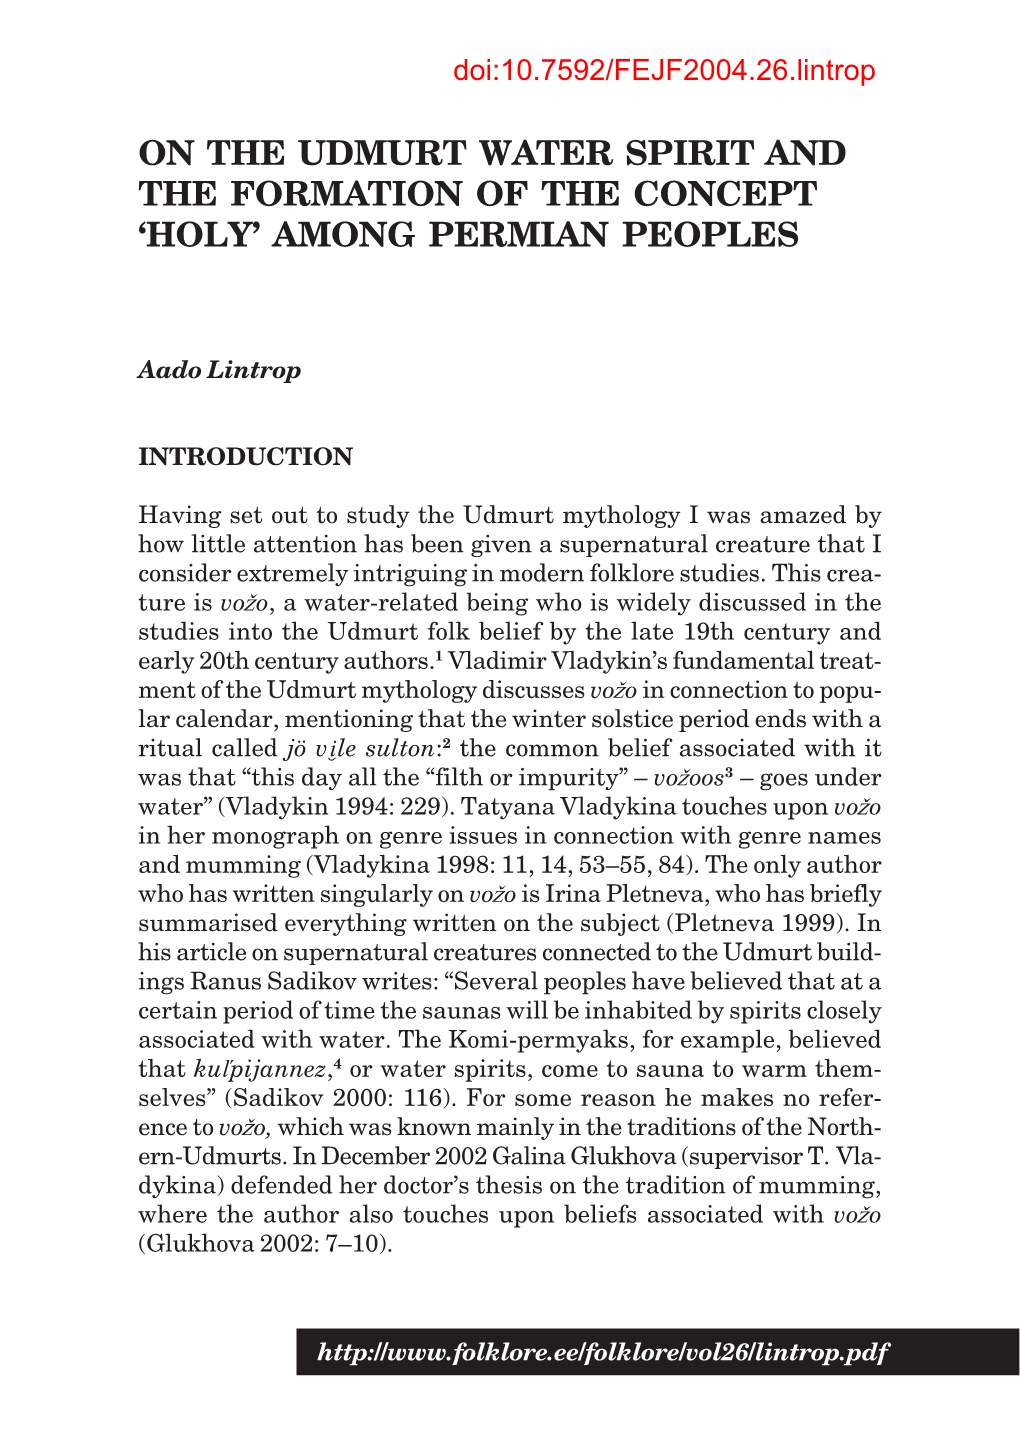 On the Udmurt Water Spirit and the Formation of the Concept ‘Holy’ Among Permian Peoples